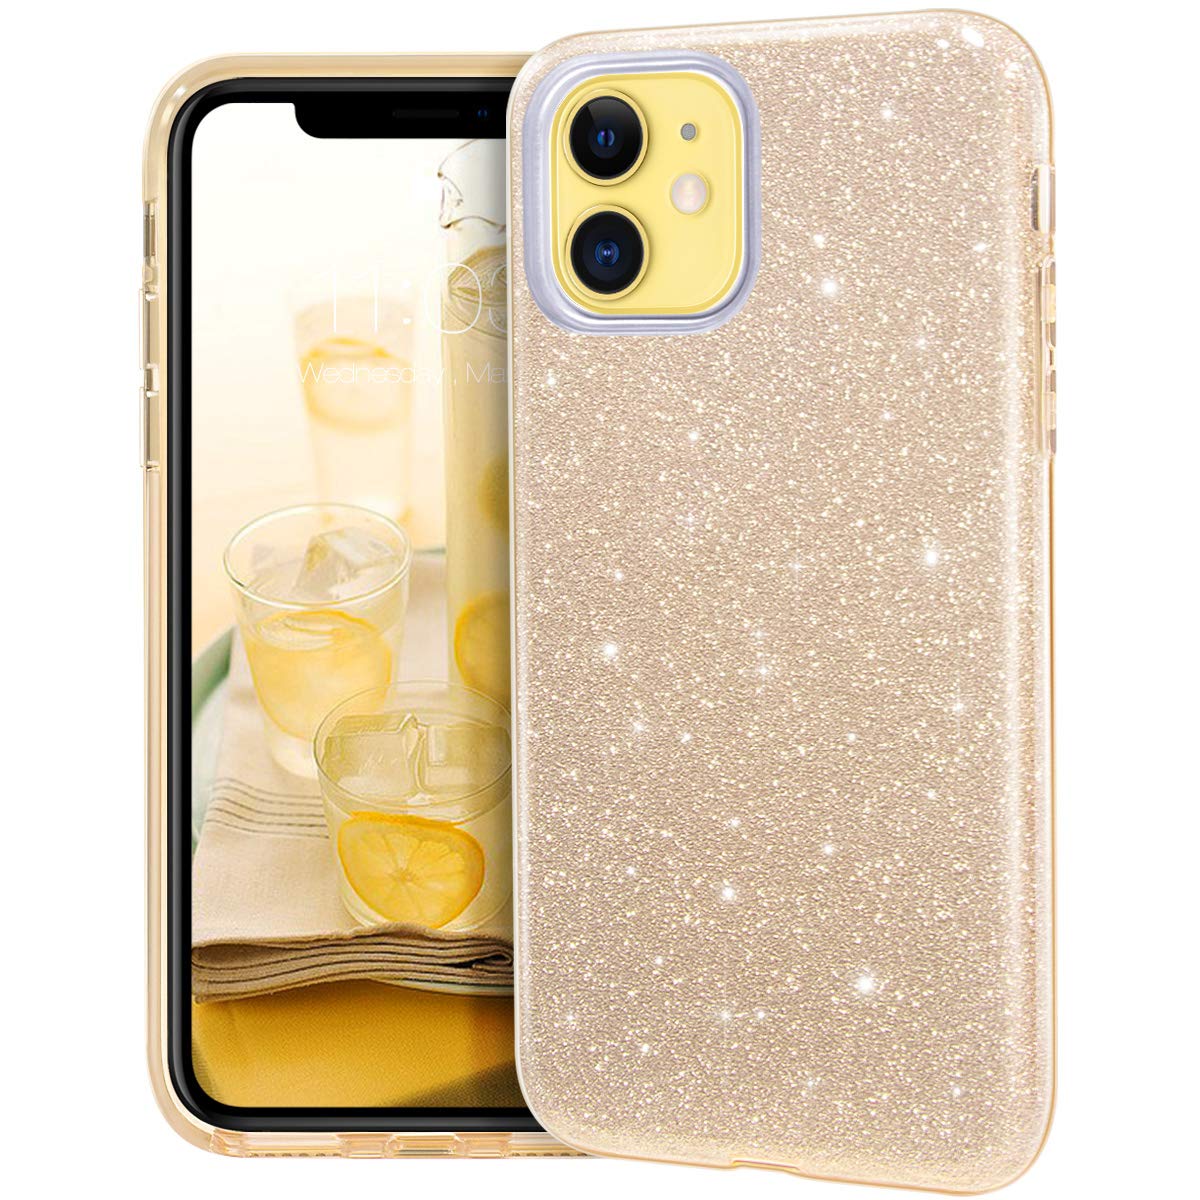 Pouzdro Forcell Shning Case iPhone 11 - Zlaté